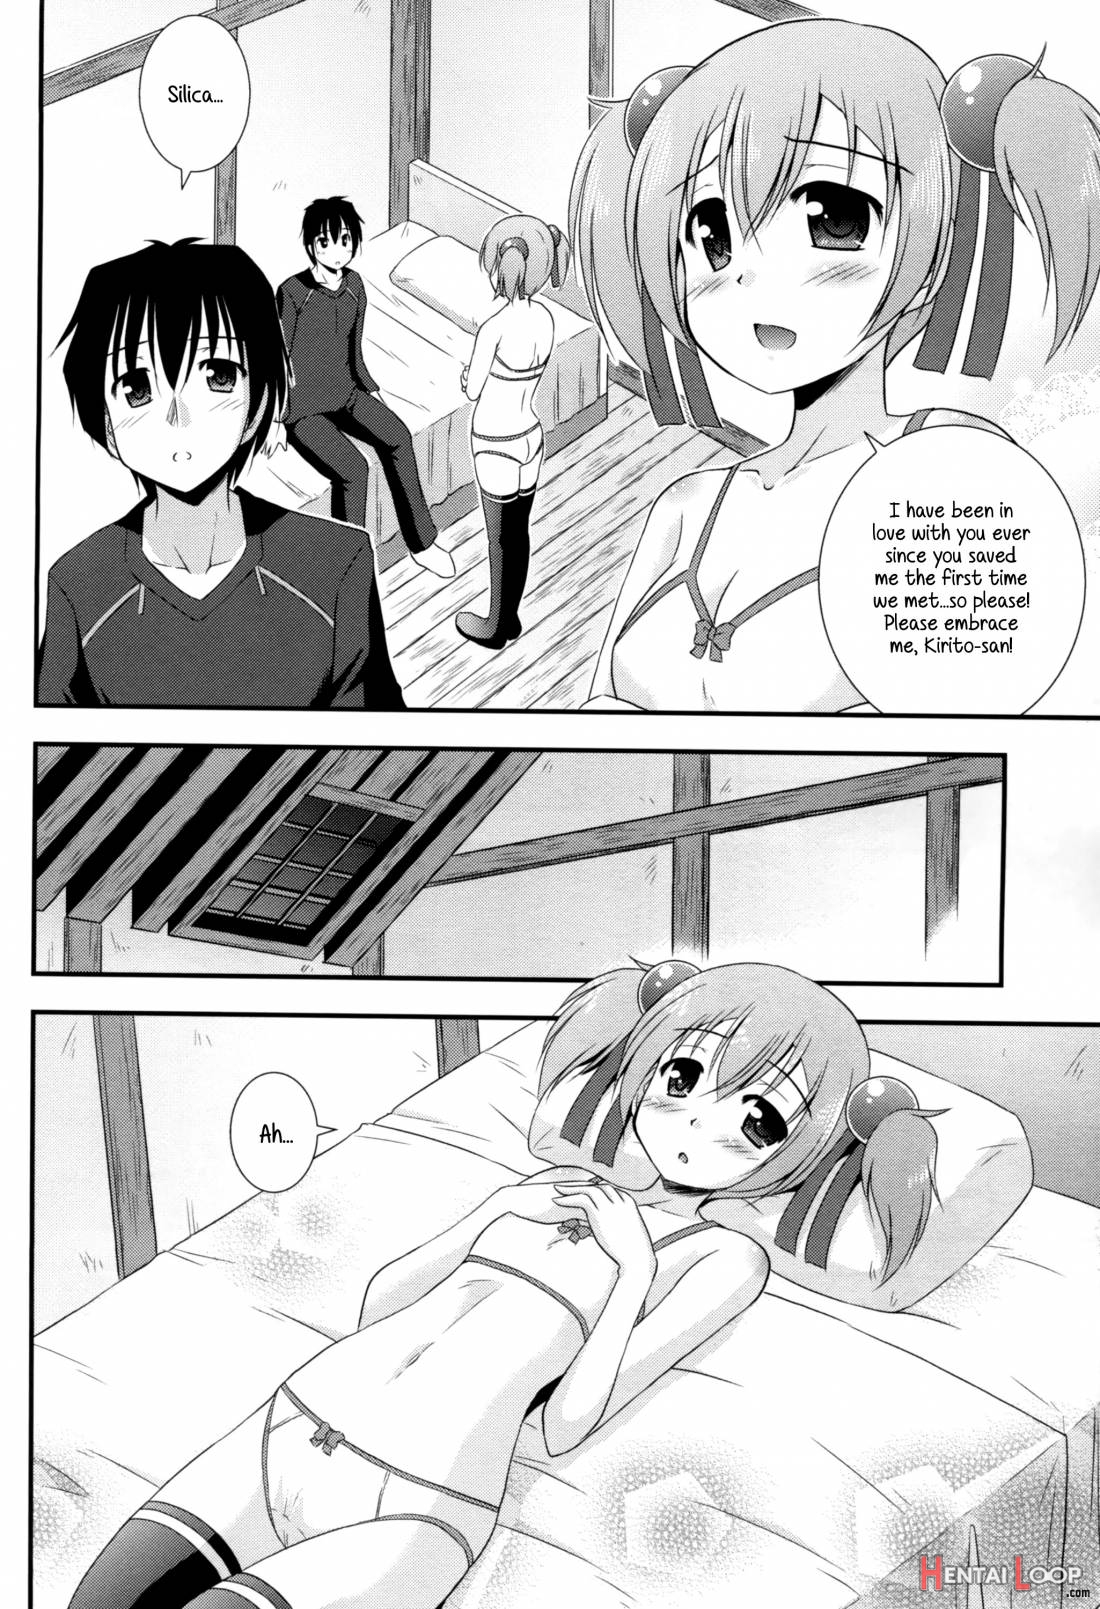 Silica Route Online page 12